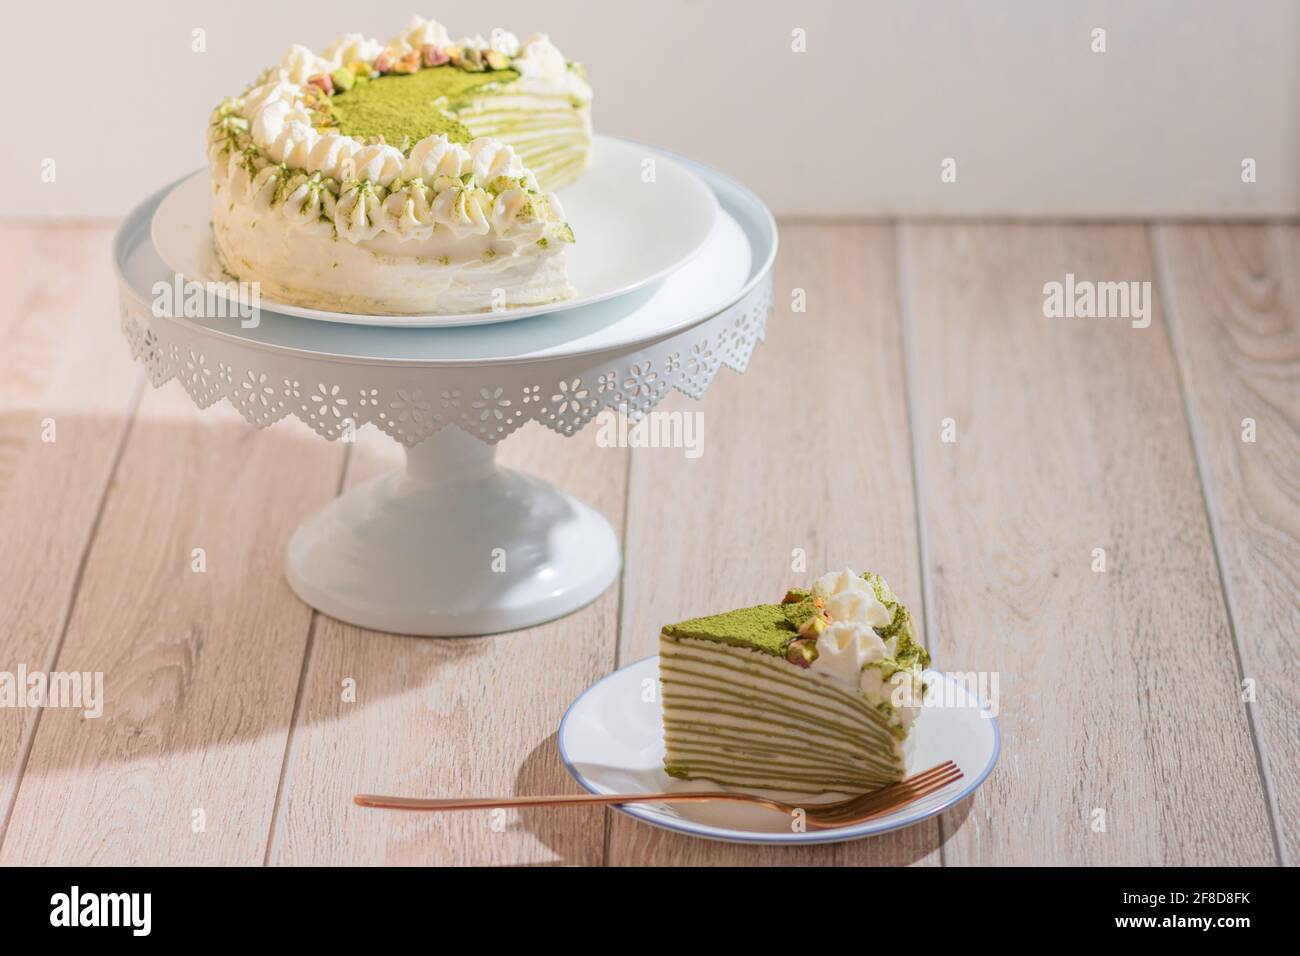 Matcha Mille Crepe Cake Presented On A Cake Holder With A Slice On A Plate Stock Photo